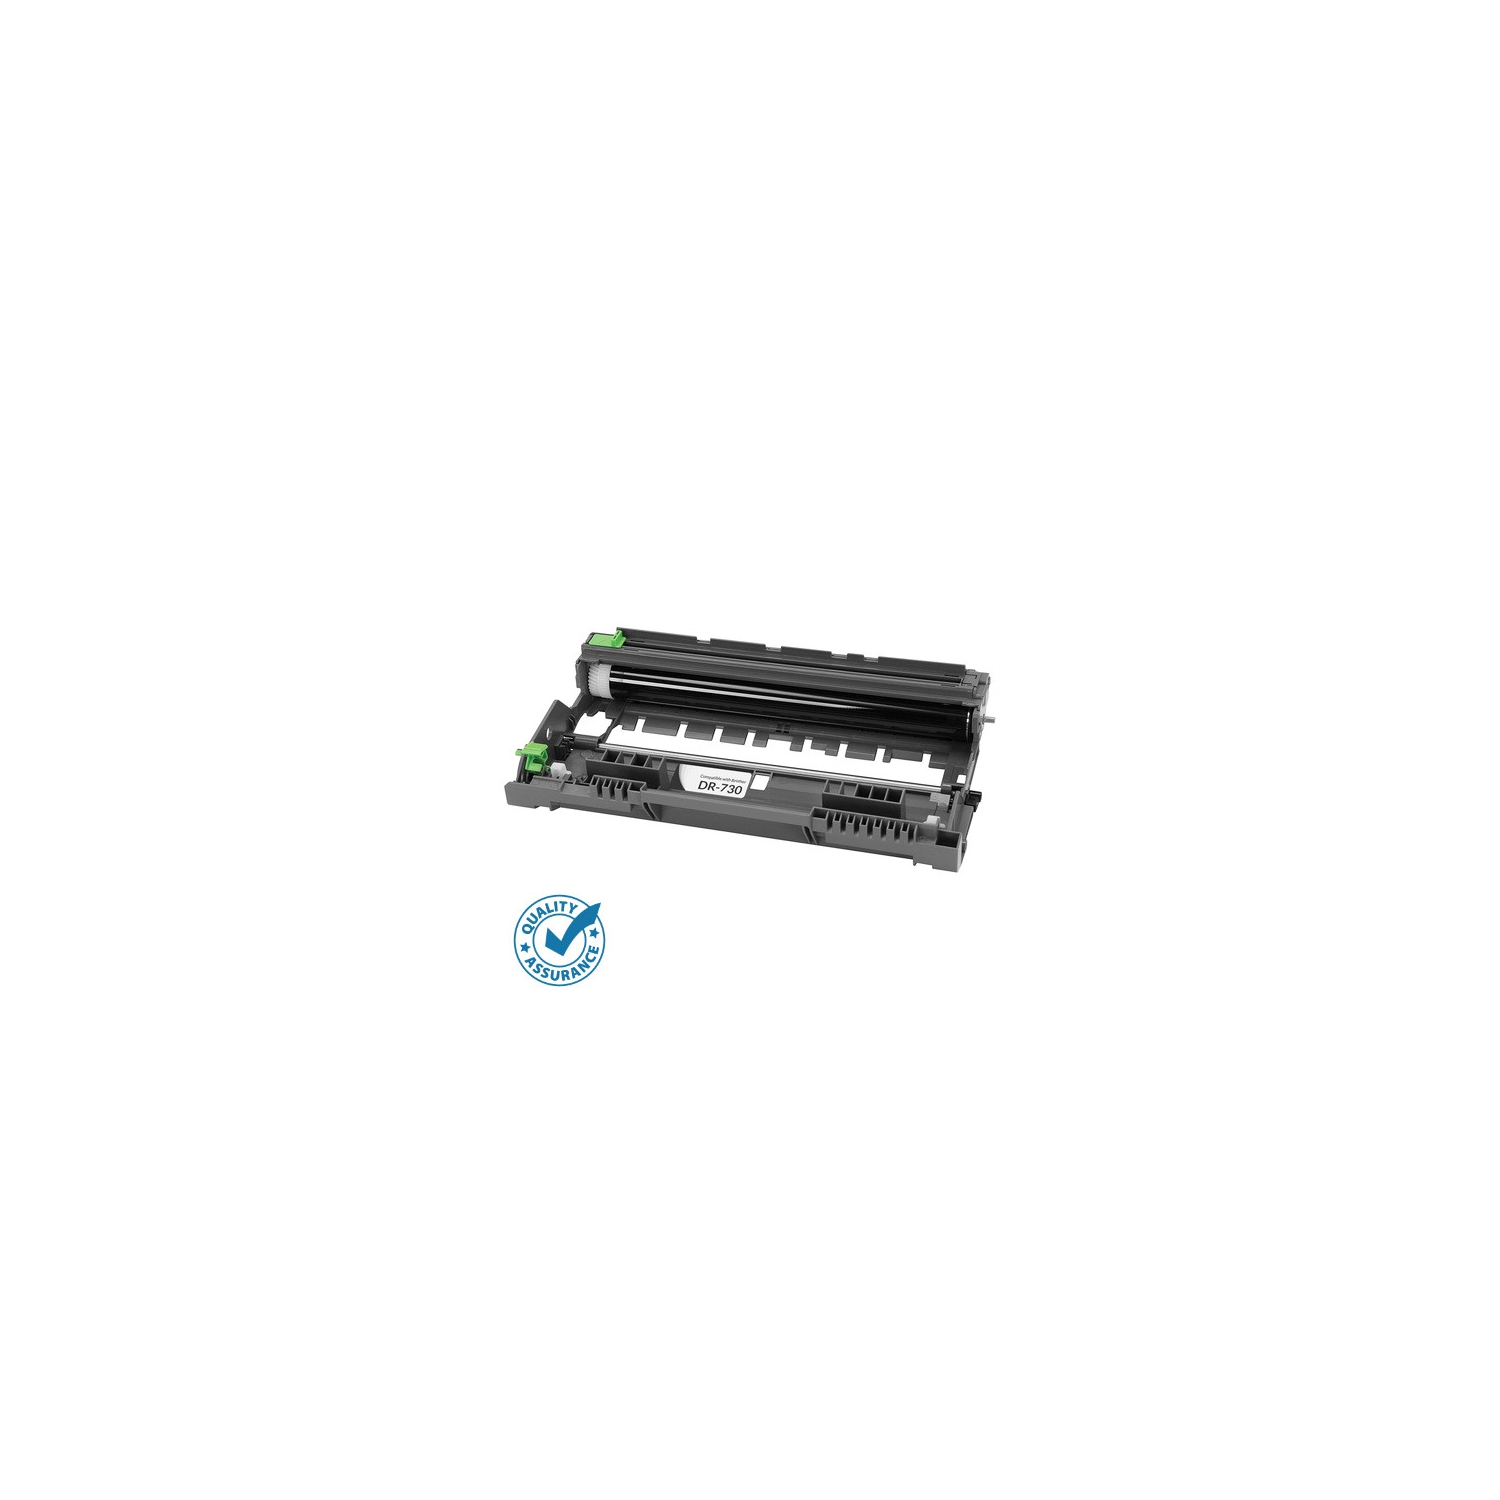 Printer Pro™ Brother DR730 Black Drum unit for DCP-L2550DW/HL-L2350DW/HL-L2370DW/L2390DW/MFC-L2710DW/MFC-L2730DW/L2750DW (This is a Drum Unit, not a toner cartridge)